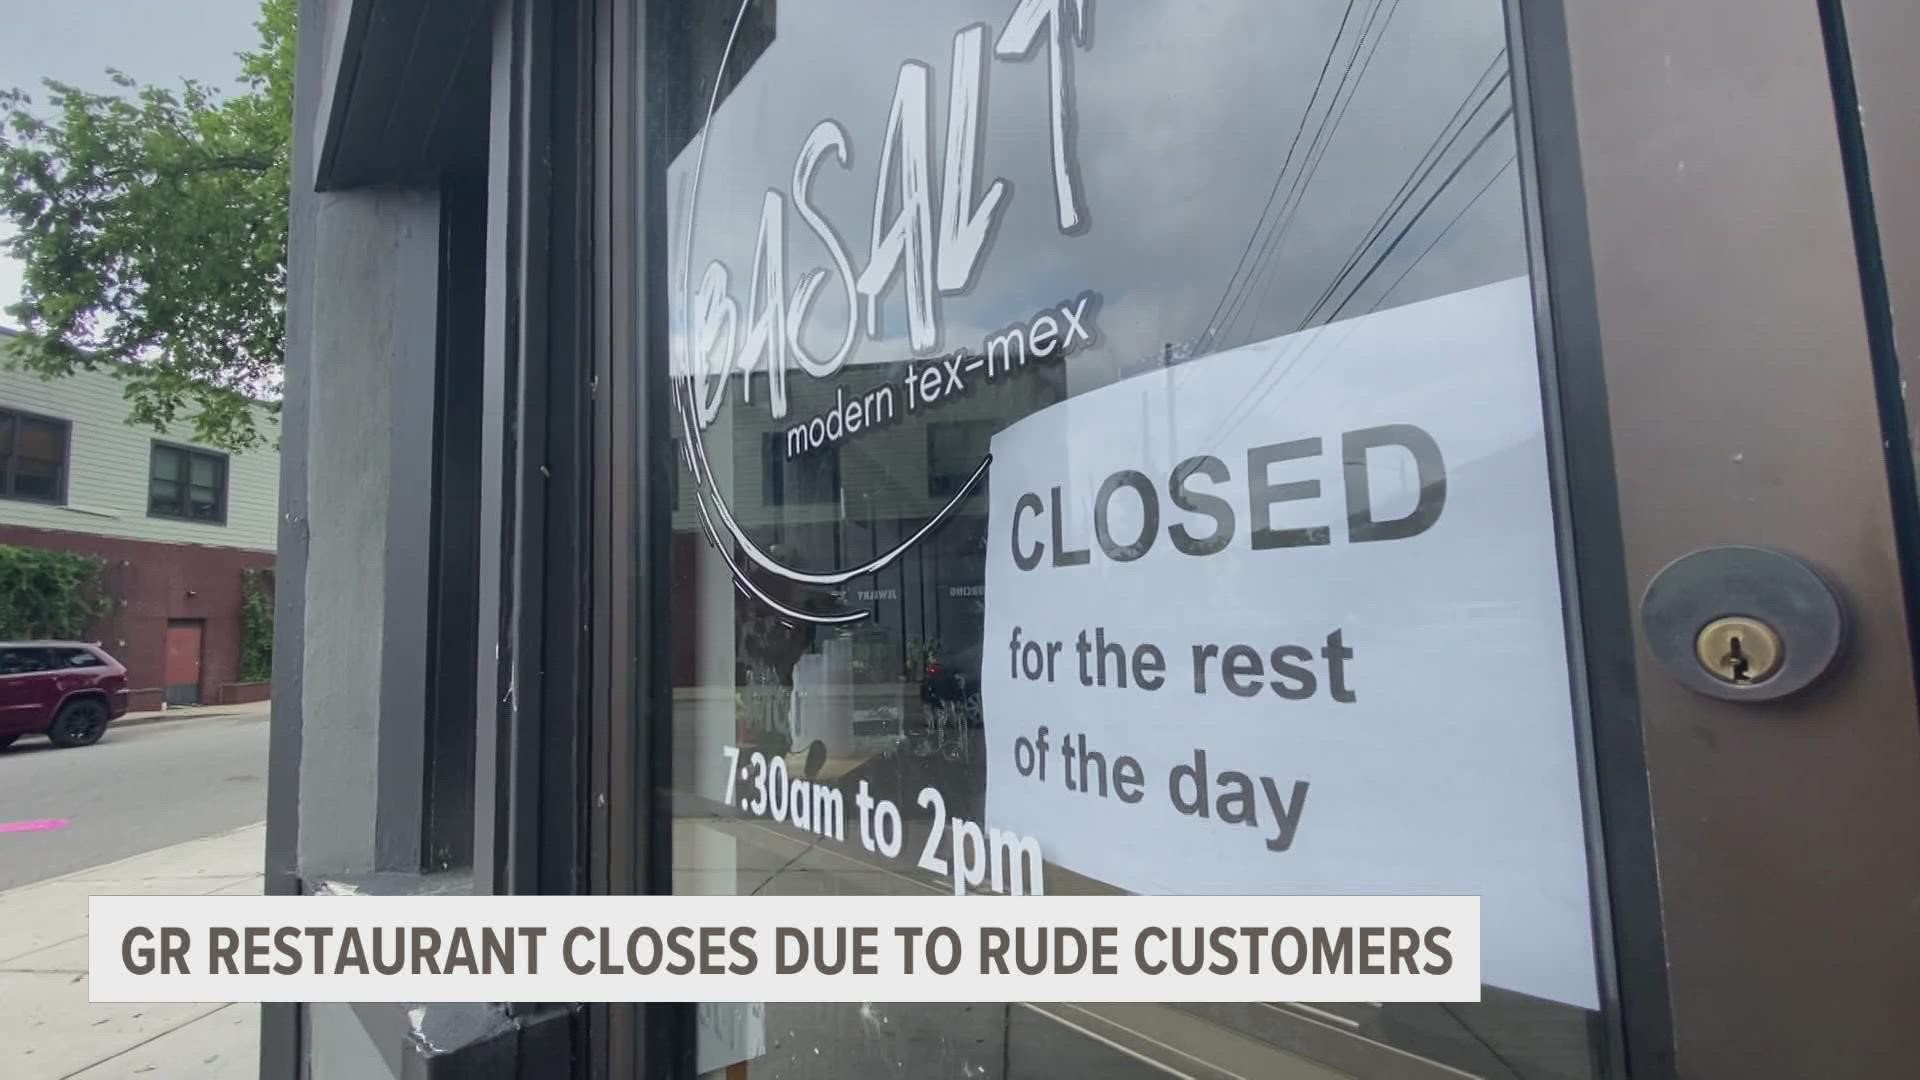 On Sunday, Steven Martinez closed down his restaurant, Basalt, early during one of their busiest days.